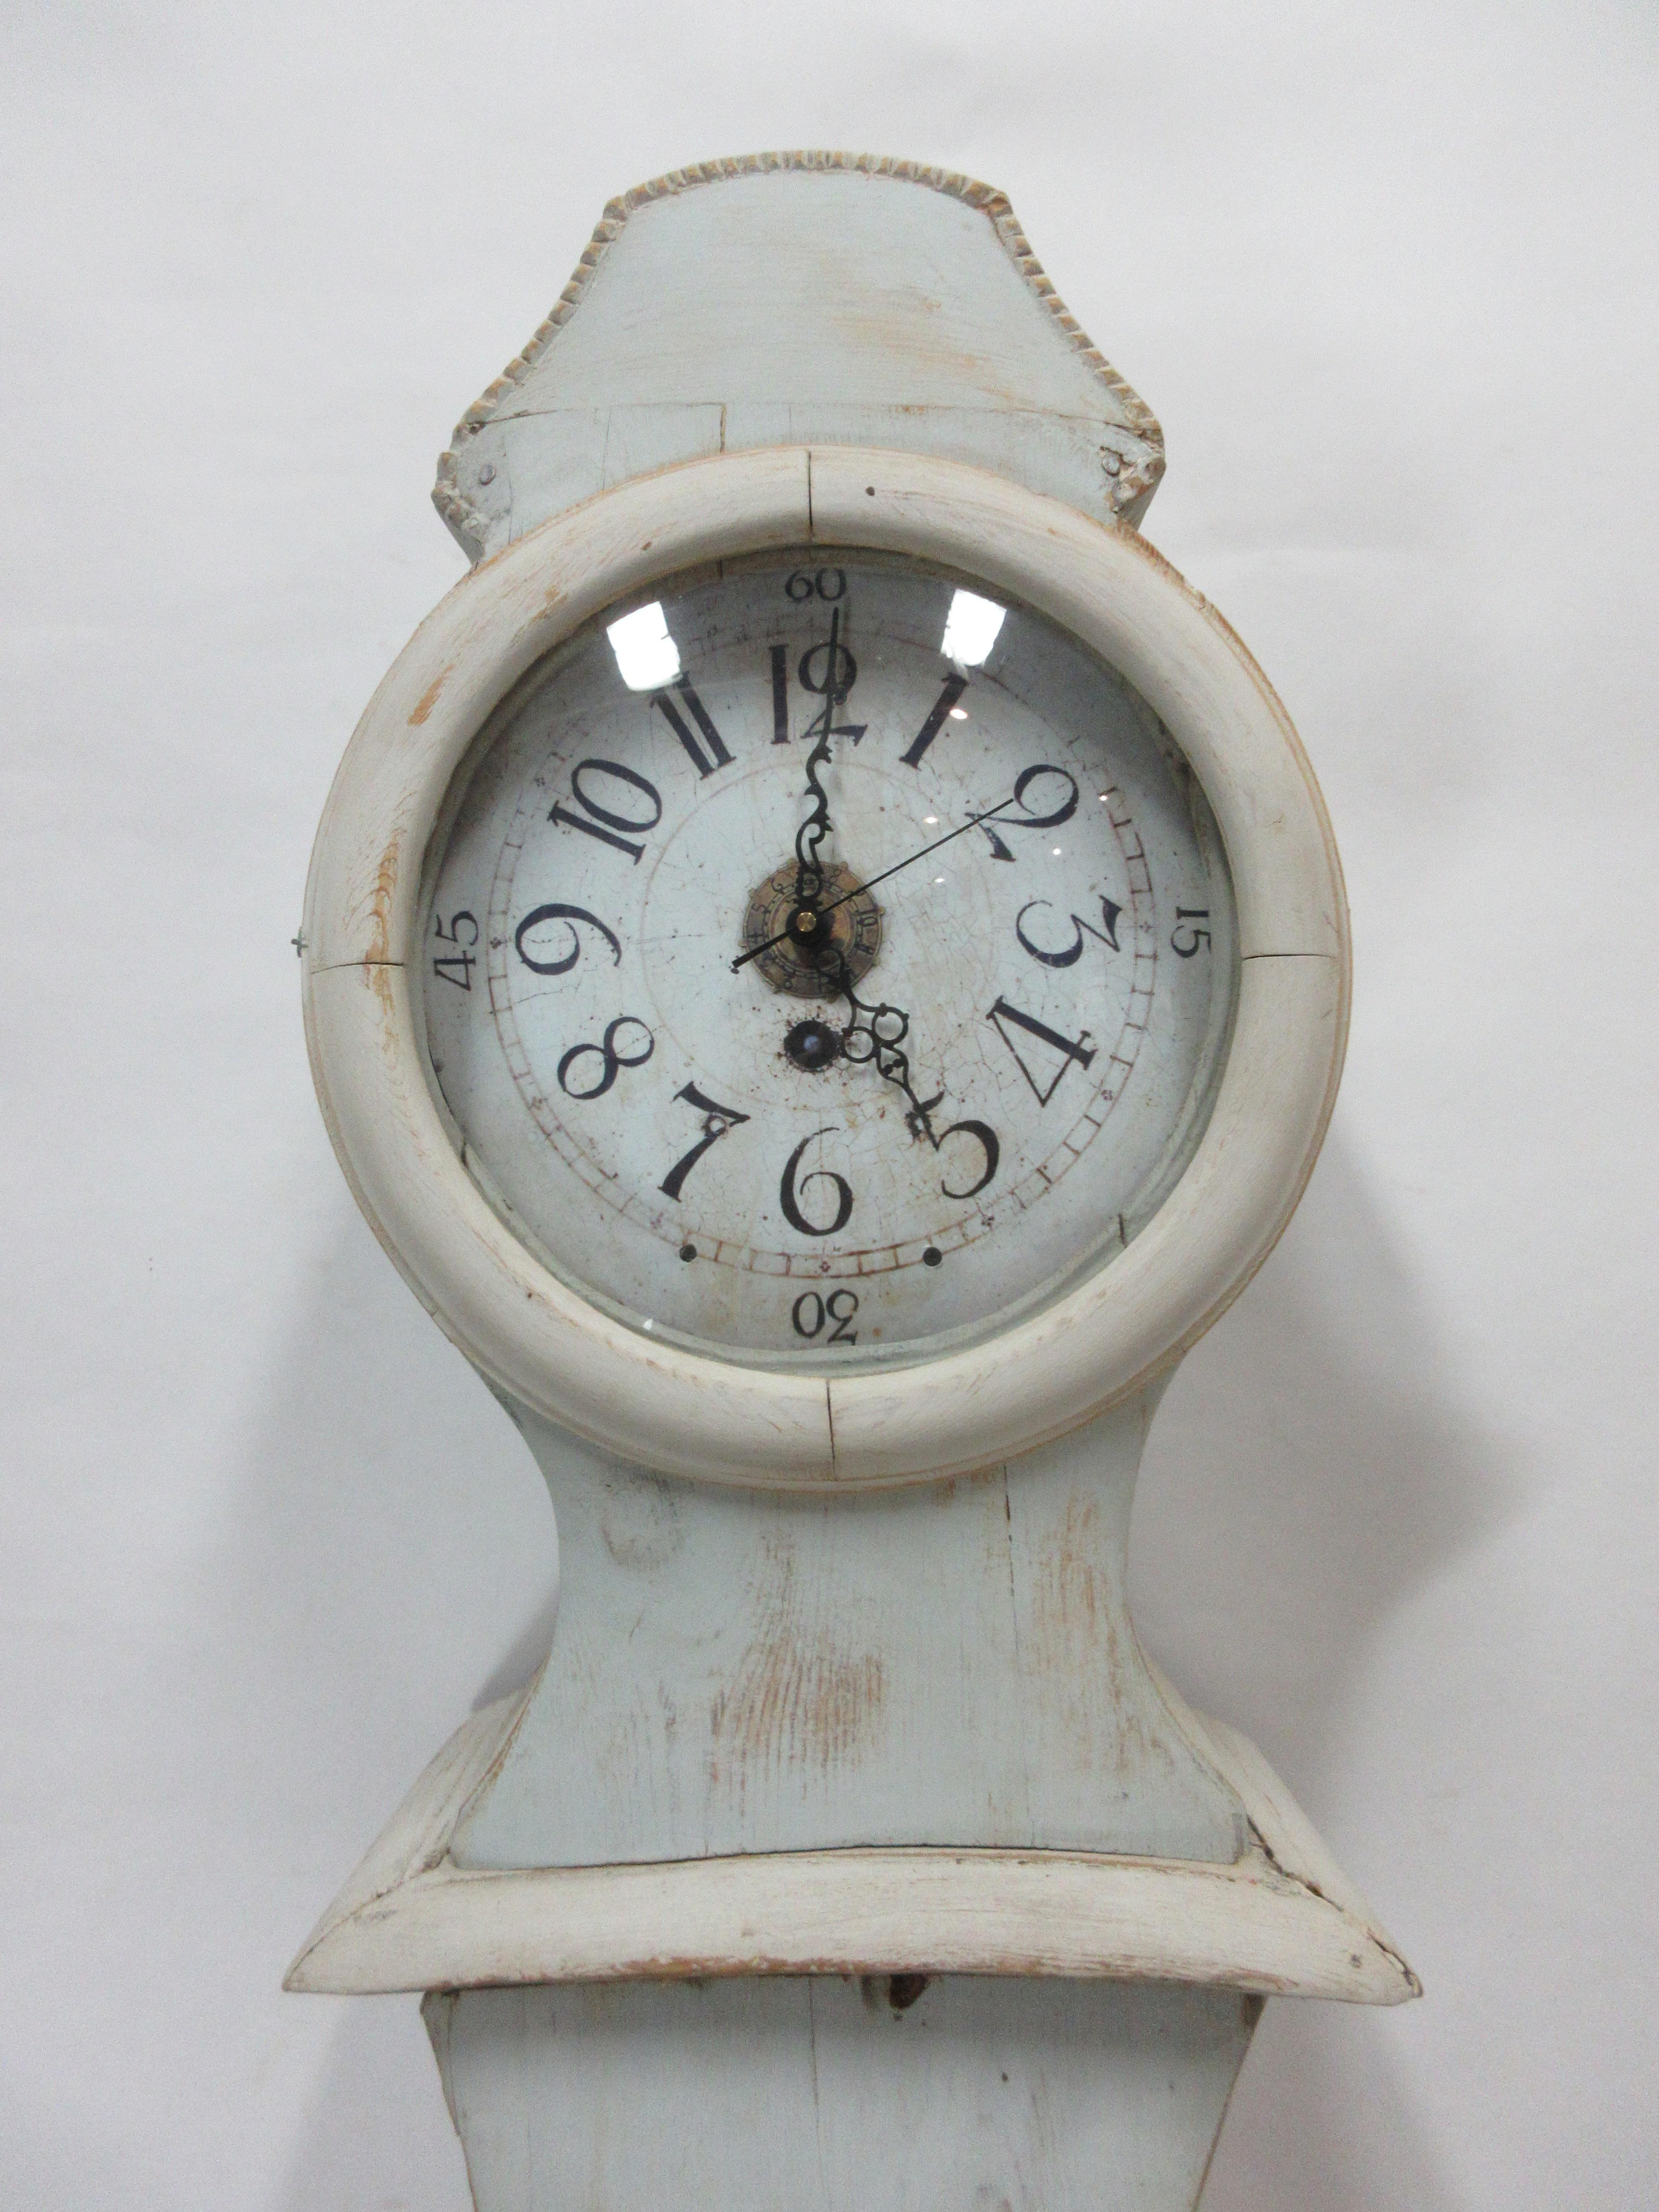 This is a 100% original painted Swedish Mora clock. The style of this clock is called a 